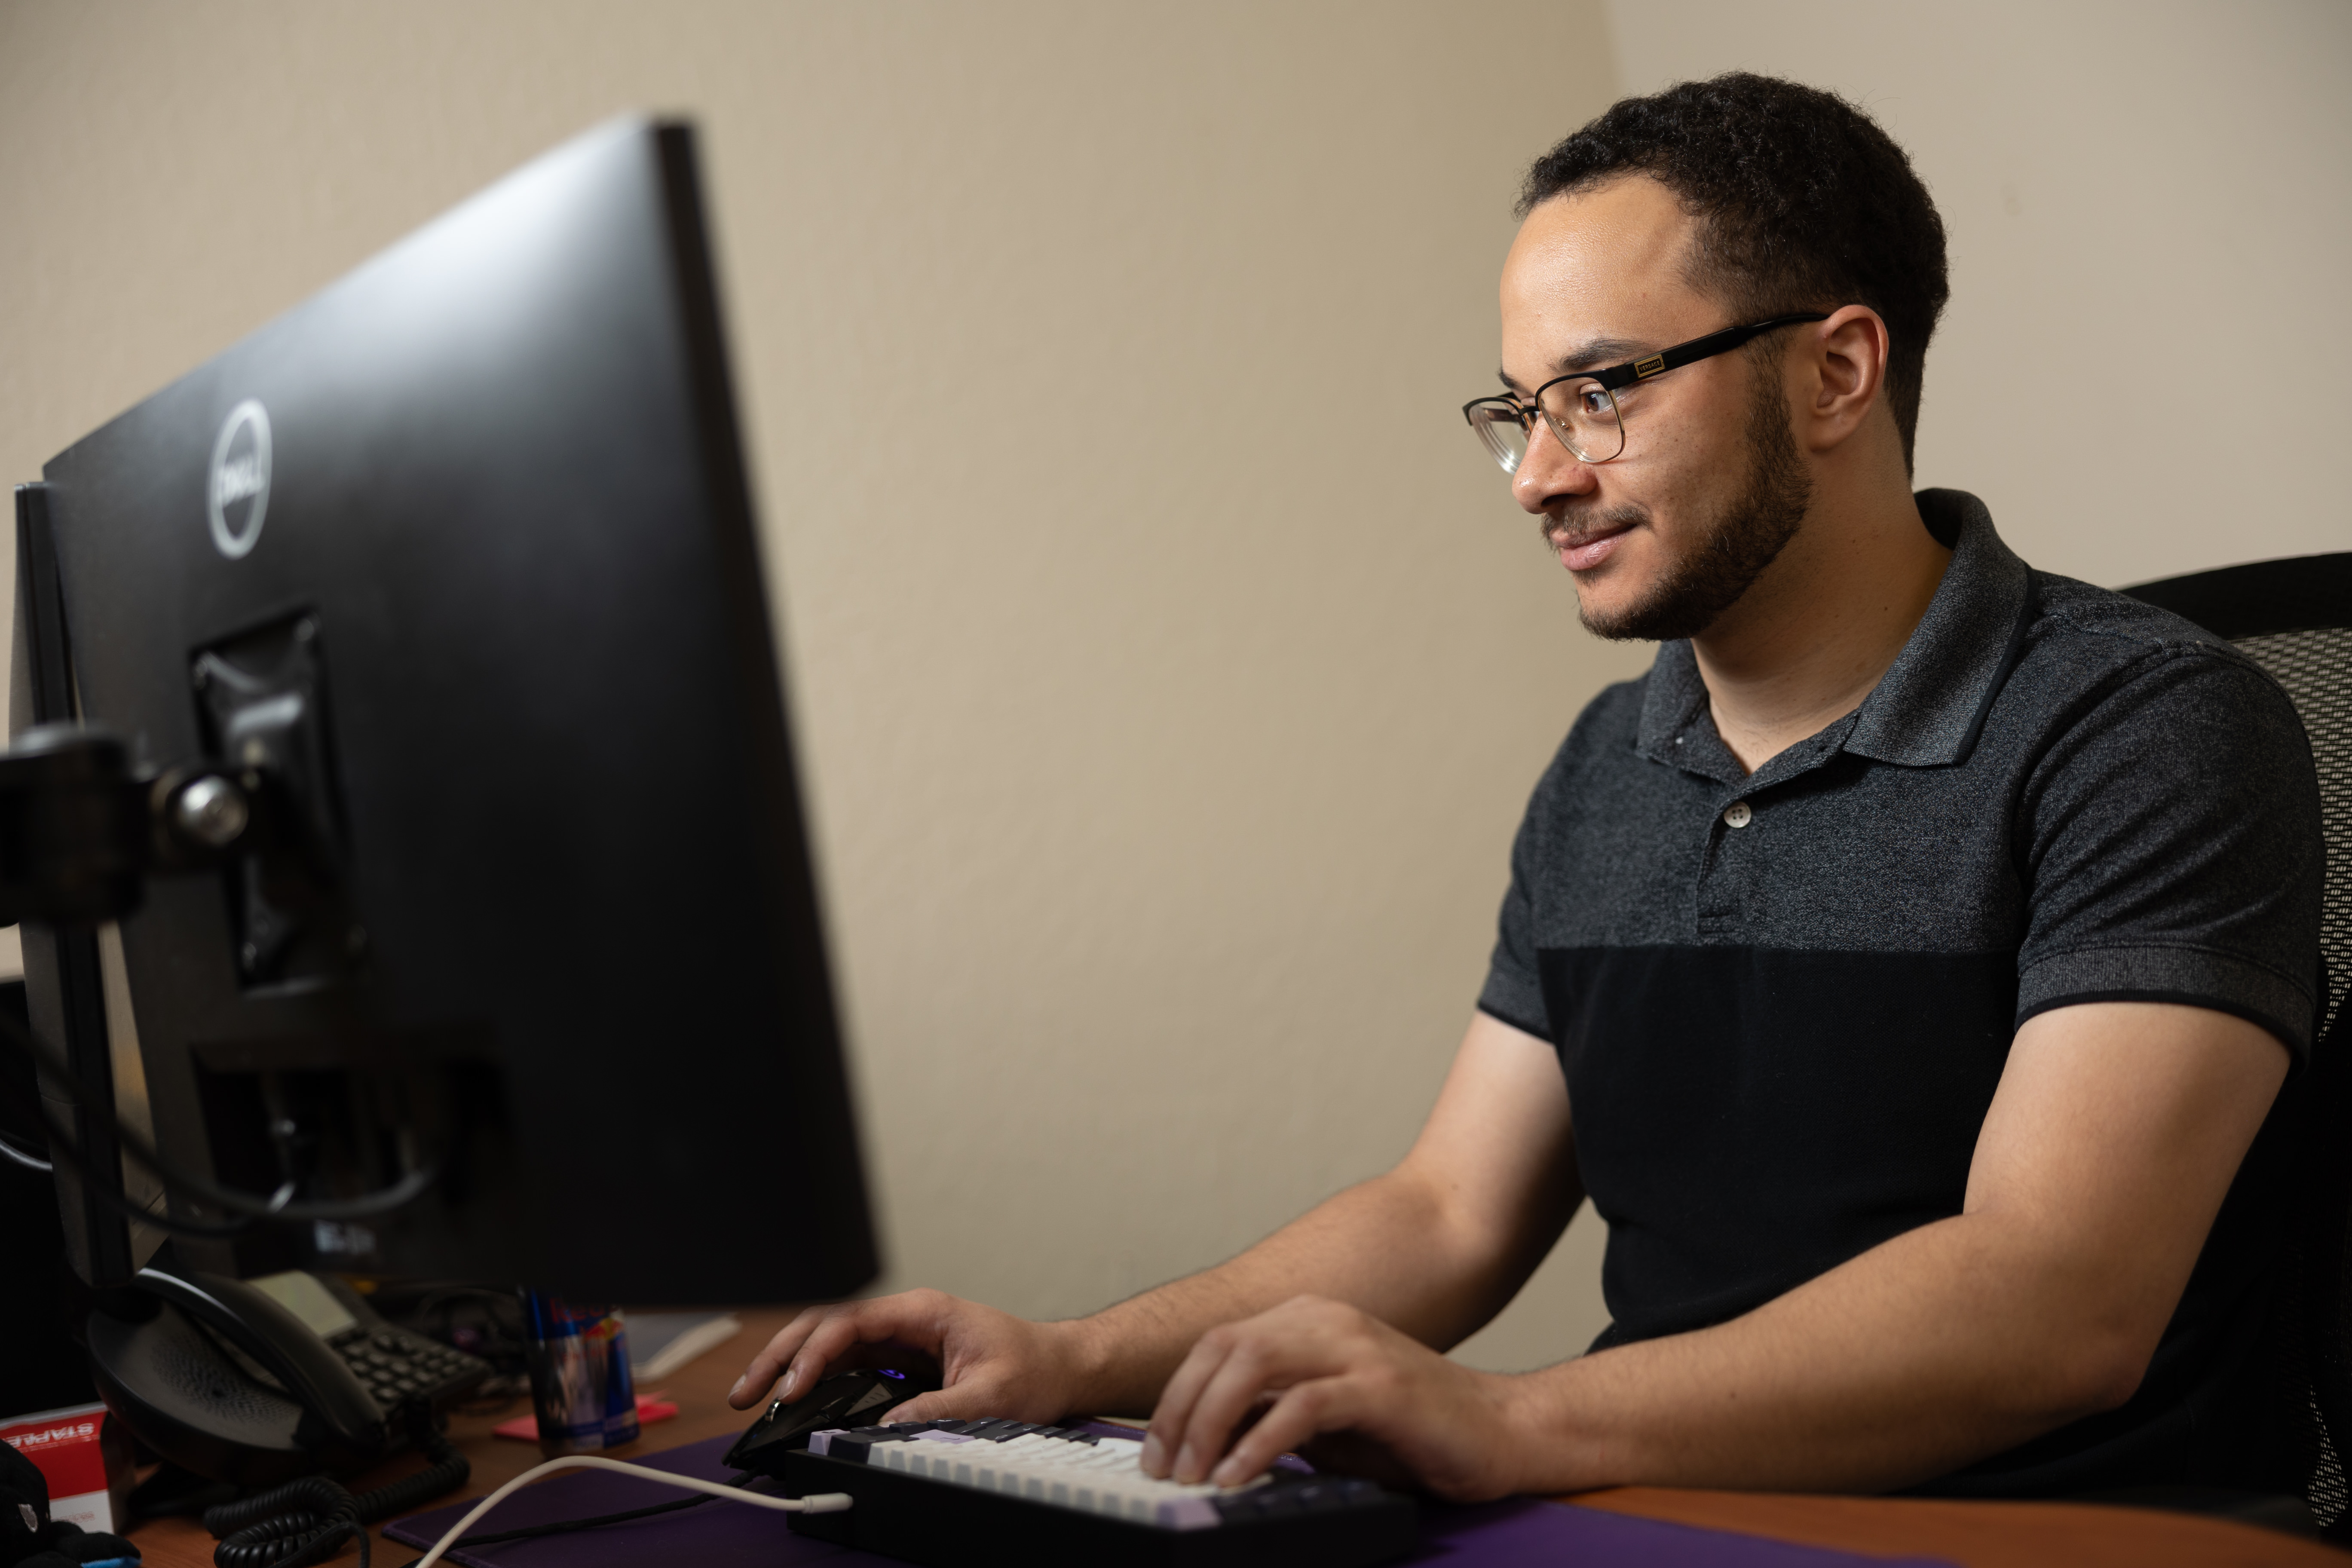 IT technician Isiah troubleshooting software at his workstation